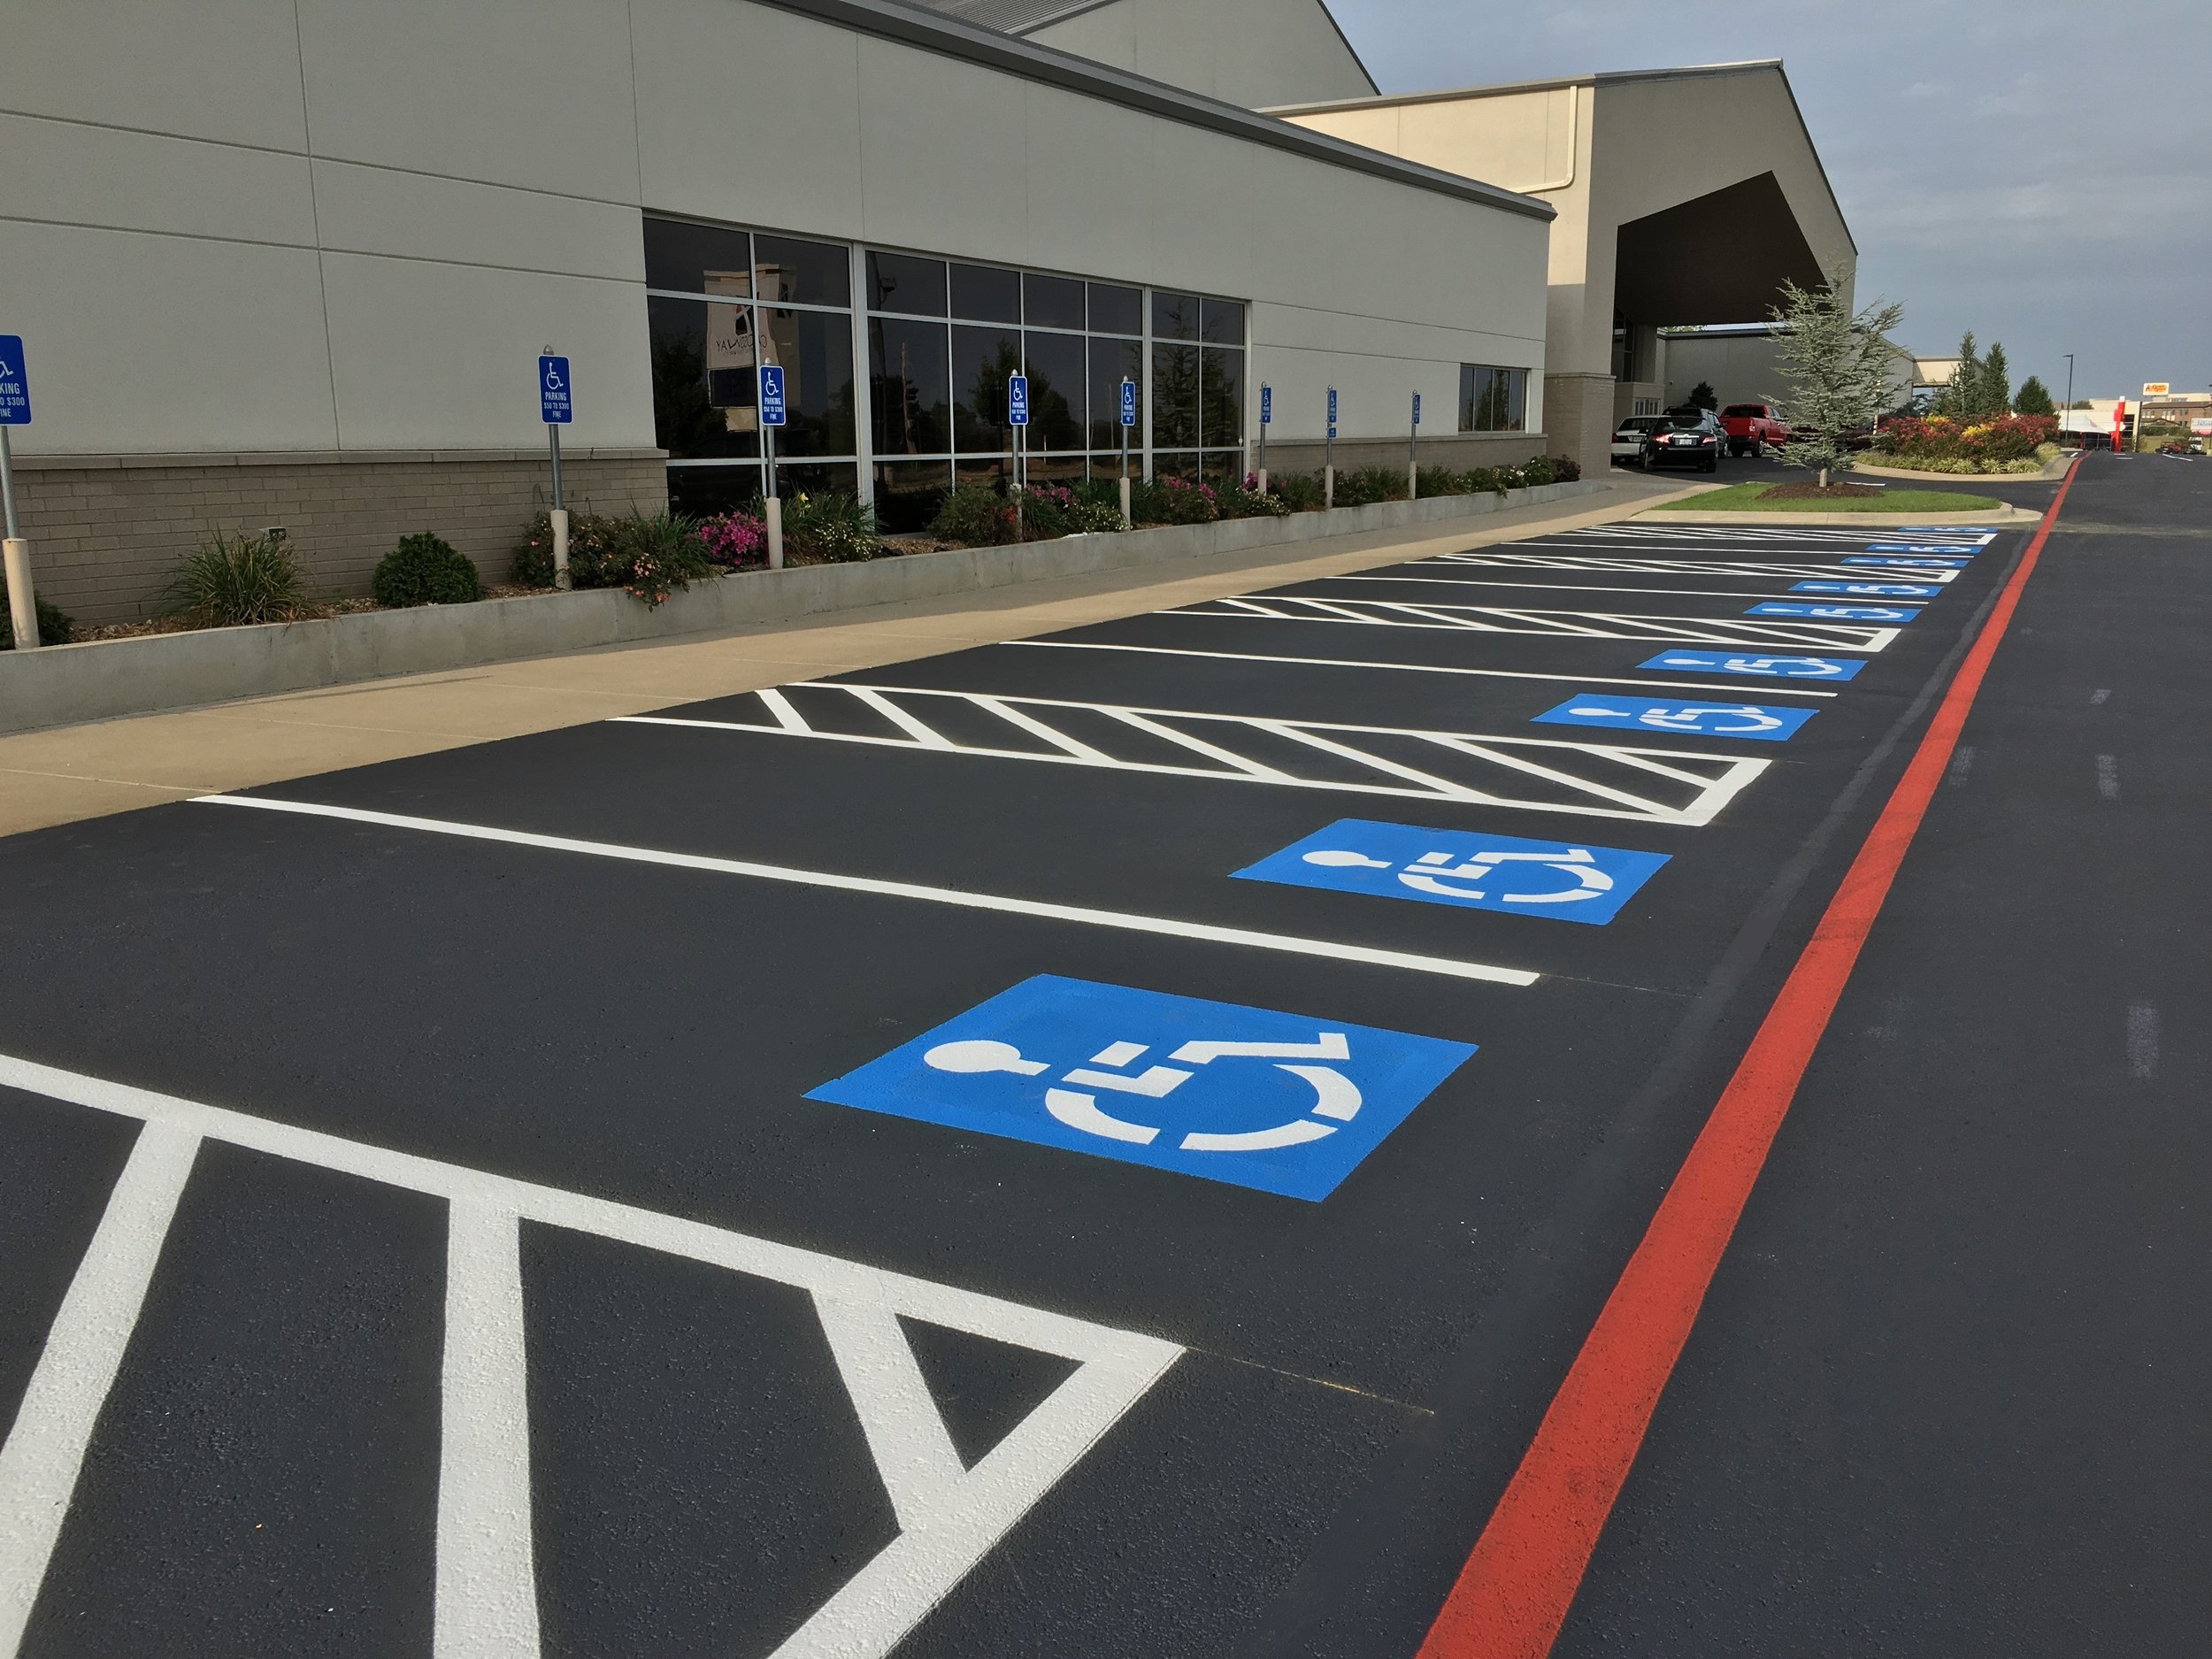 Newly striped parking lot with handicap parking and a focus on the bright, contrasting lines freshly painted by Springfield Striping and Sealing in Springfield, Missouri.